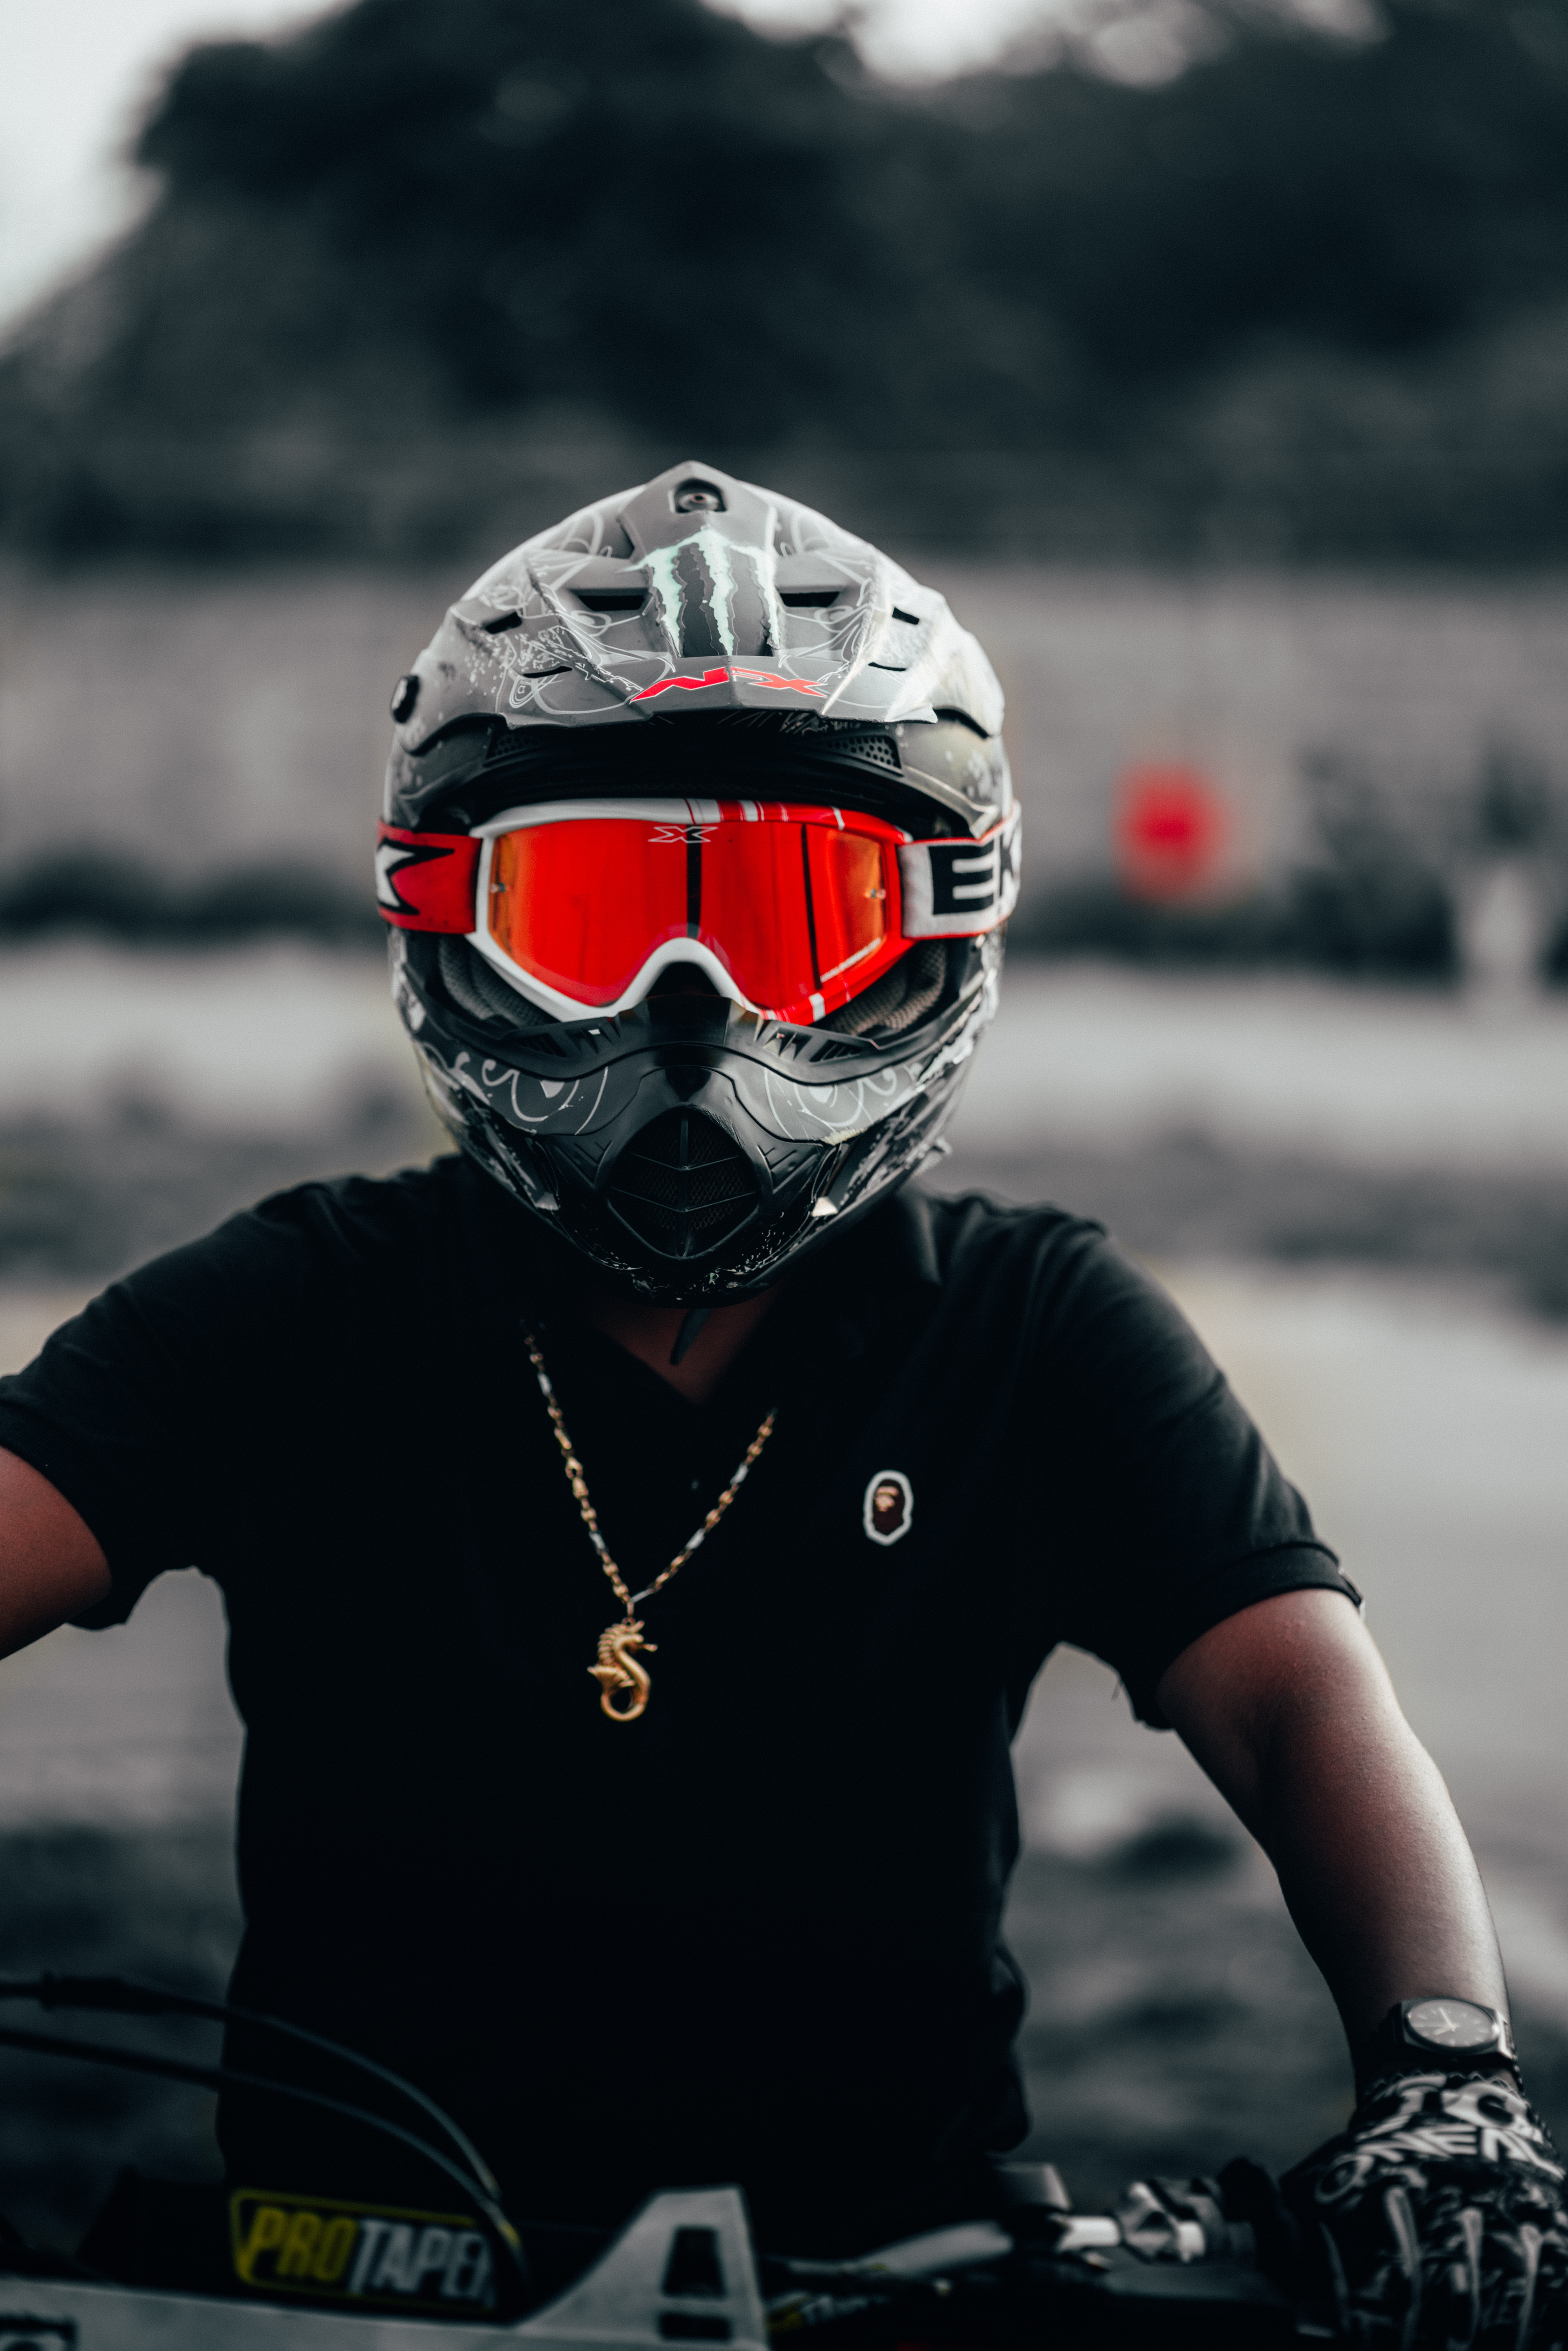 motorcyclist, red, miscellanea, miscellaneous, helmet, glasses, spectacles